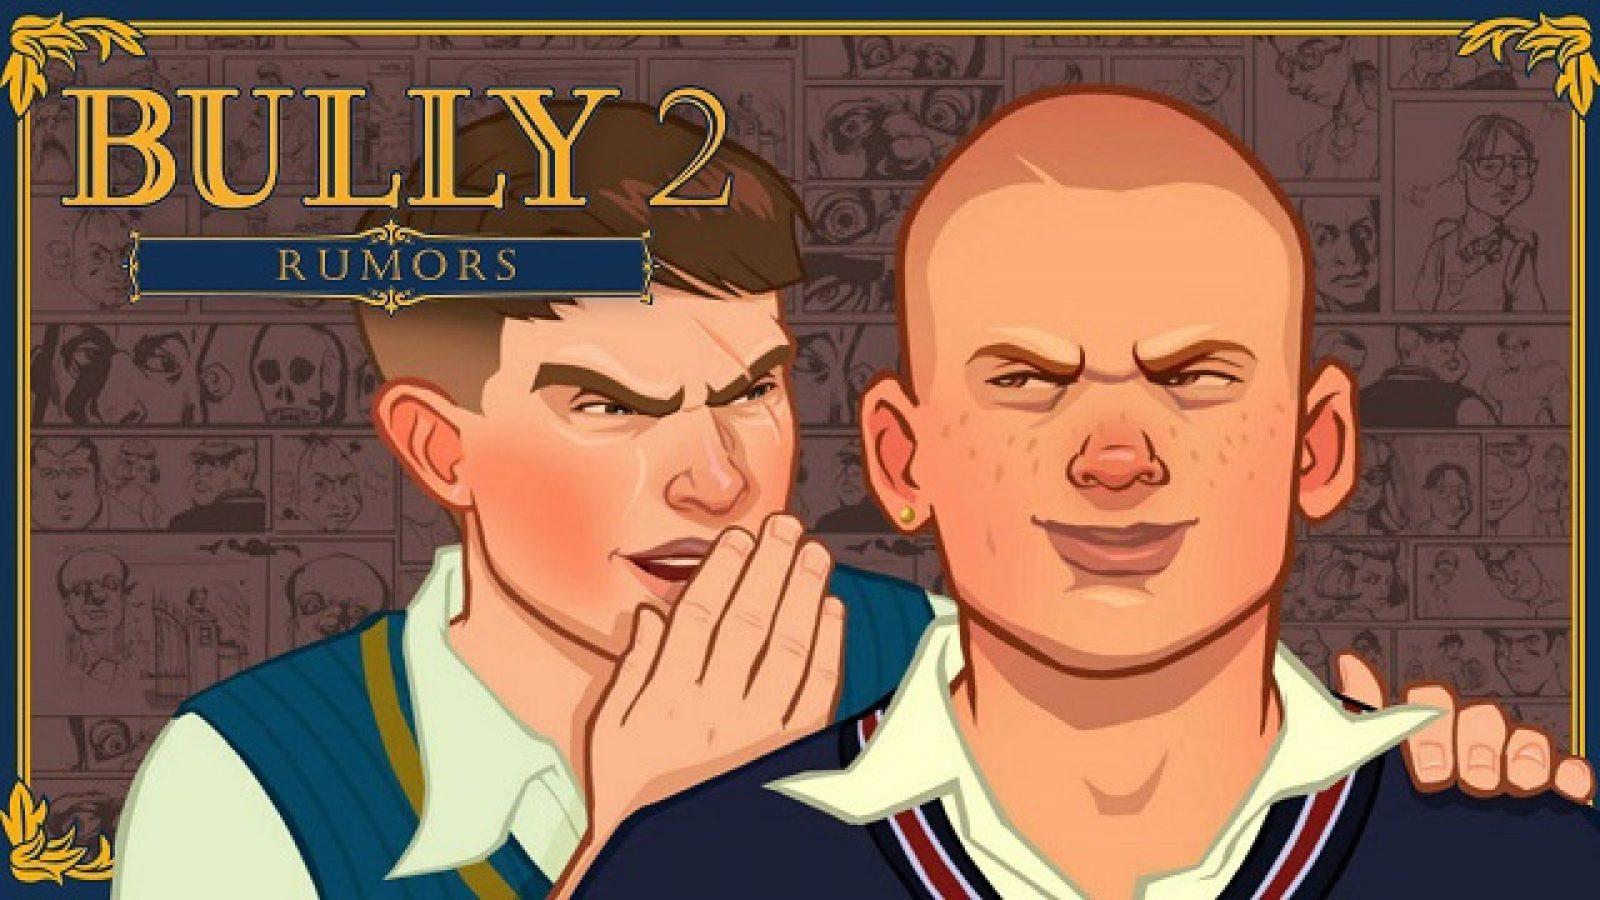 Rockstar Games may be releasing Bully 2 after Red Dead Redemption 2